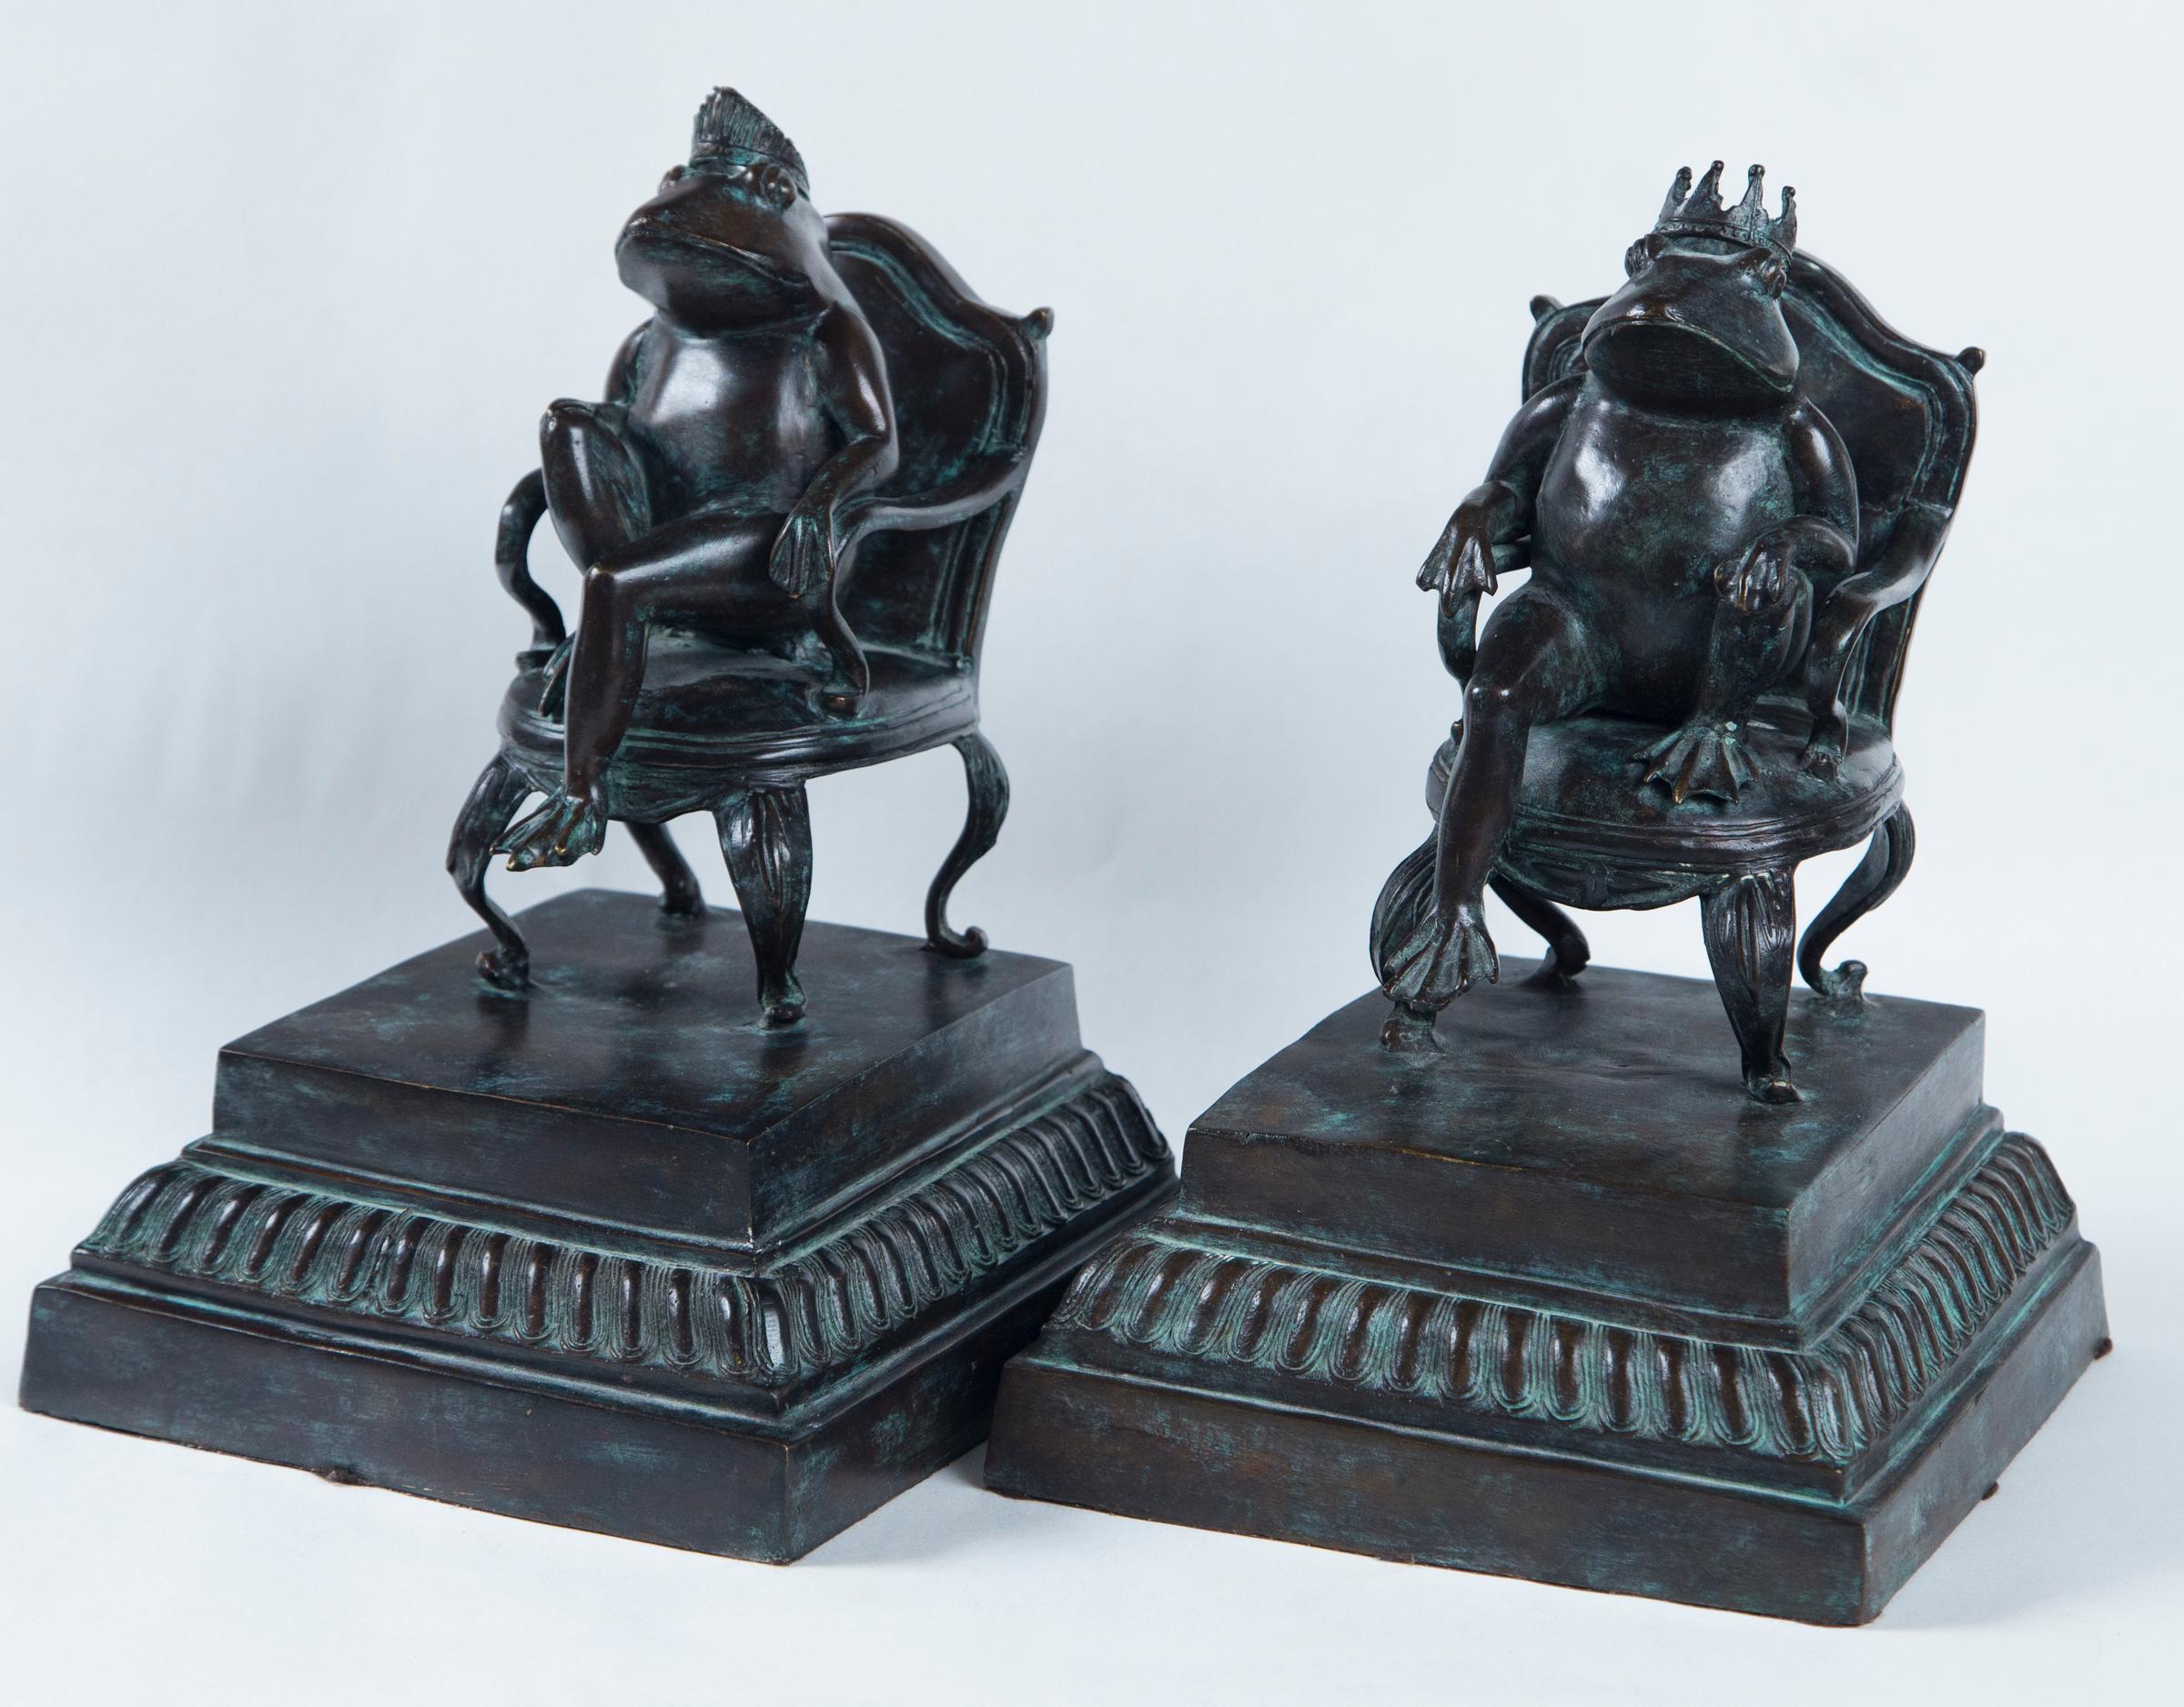 This whimsical pair of seated crowned frogs have a  vertigris  blue/green  patina
They sit in open arm chairs on top of integral stepped bases with gadrooned edging. The back are flat to go against the books. The 11.75 inches is the tallest.